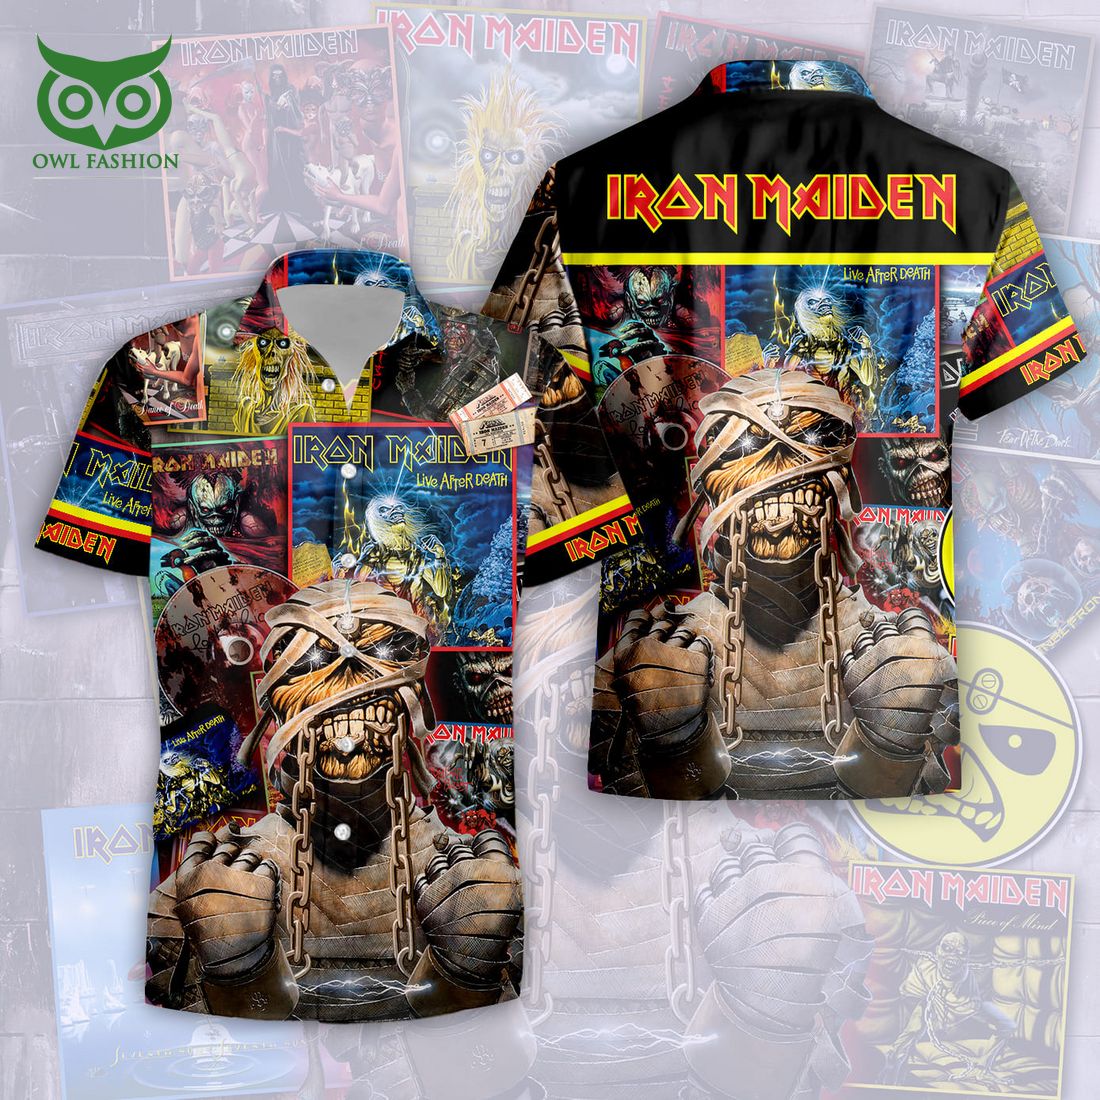 Ironmaiden Beast Hawaiian Shirt Shorts Oh my God you have put on so much!